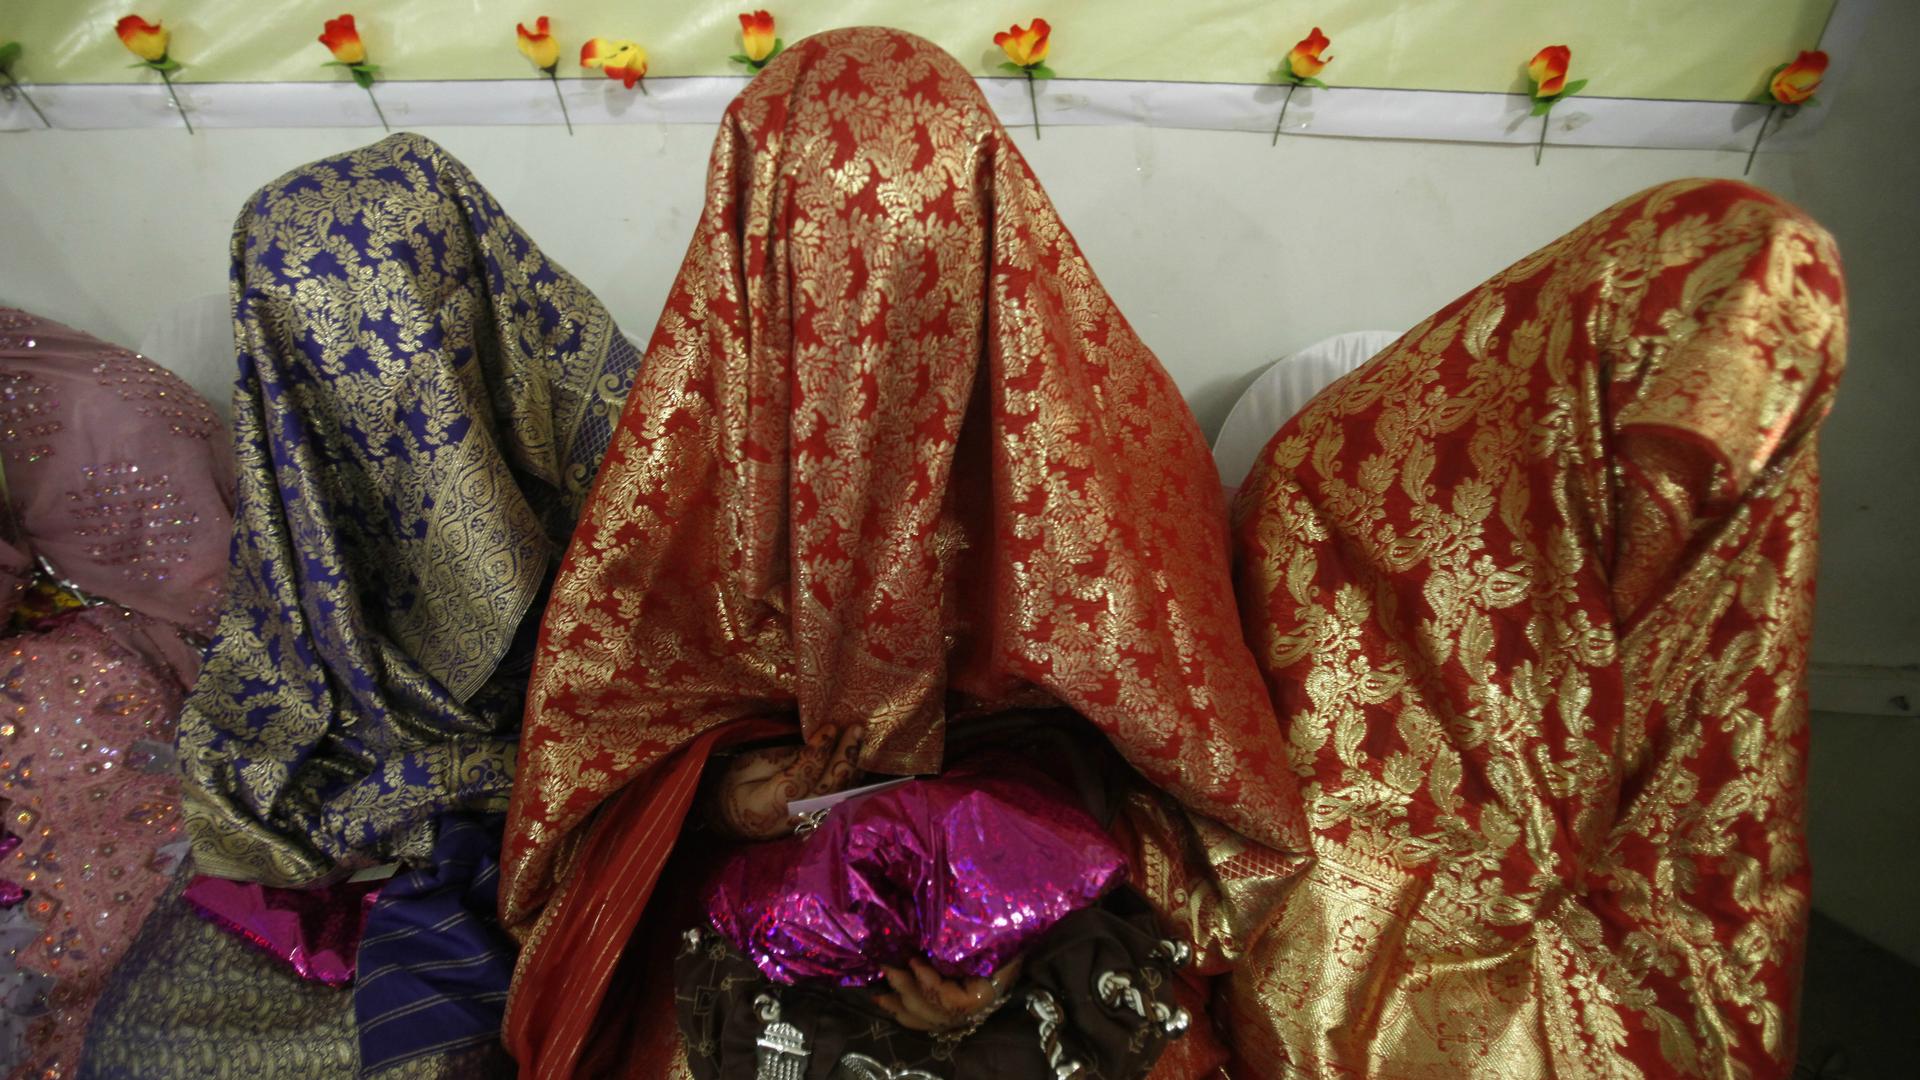 Brides sit together during a mass wedding ceremony in Peshawar, Pakistan, April 25, 2014.